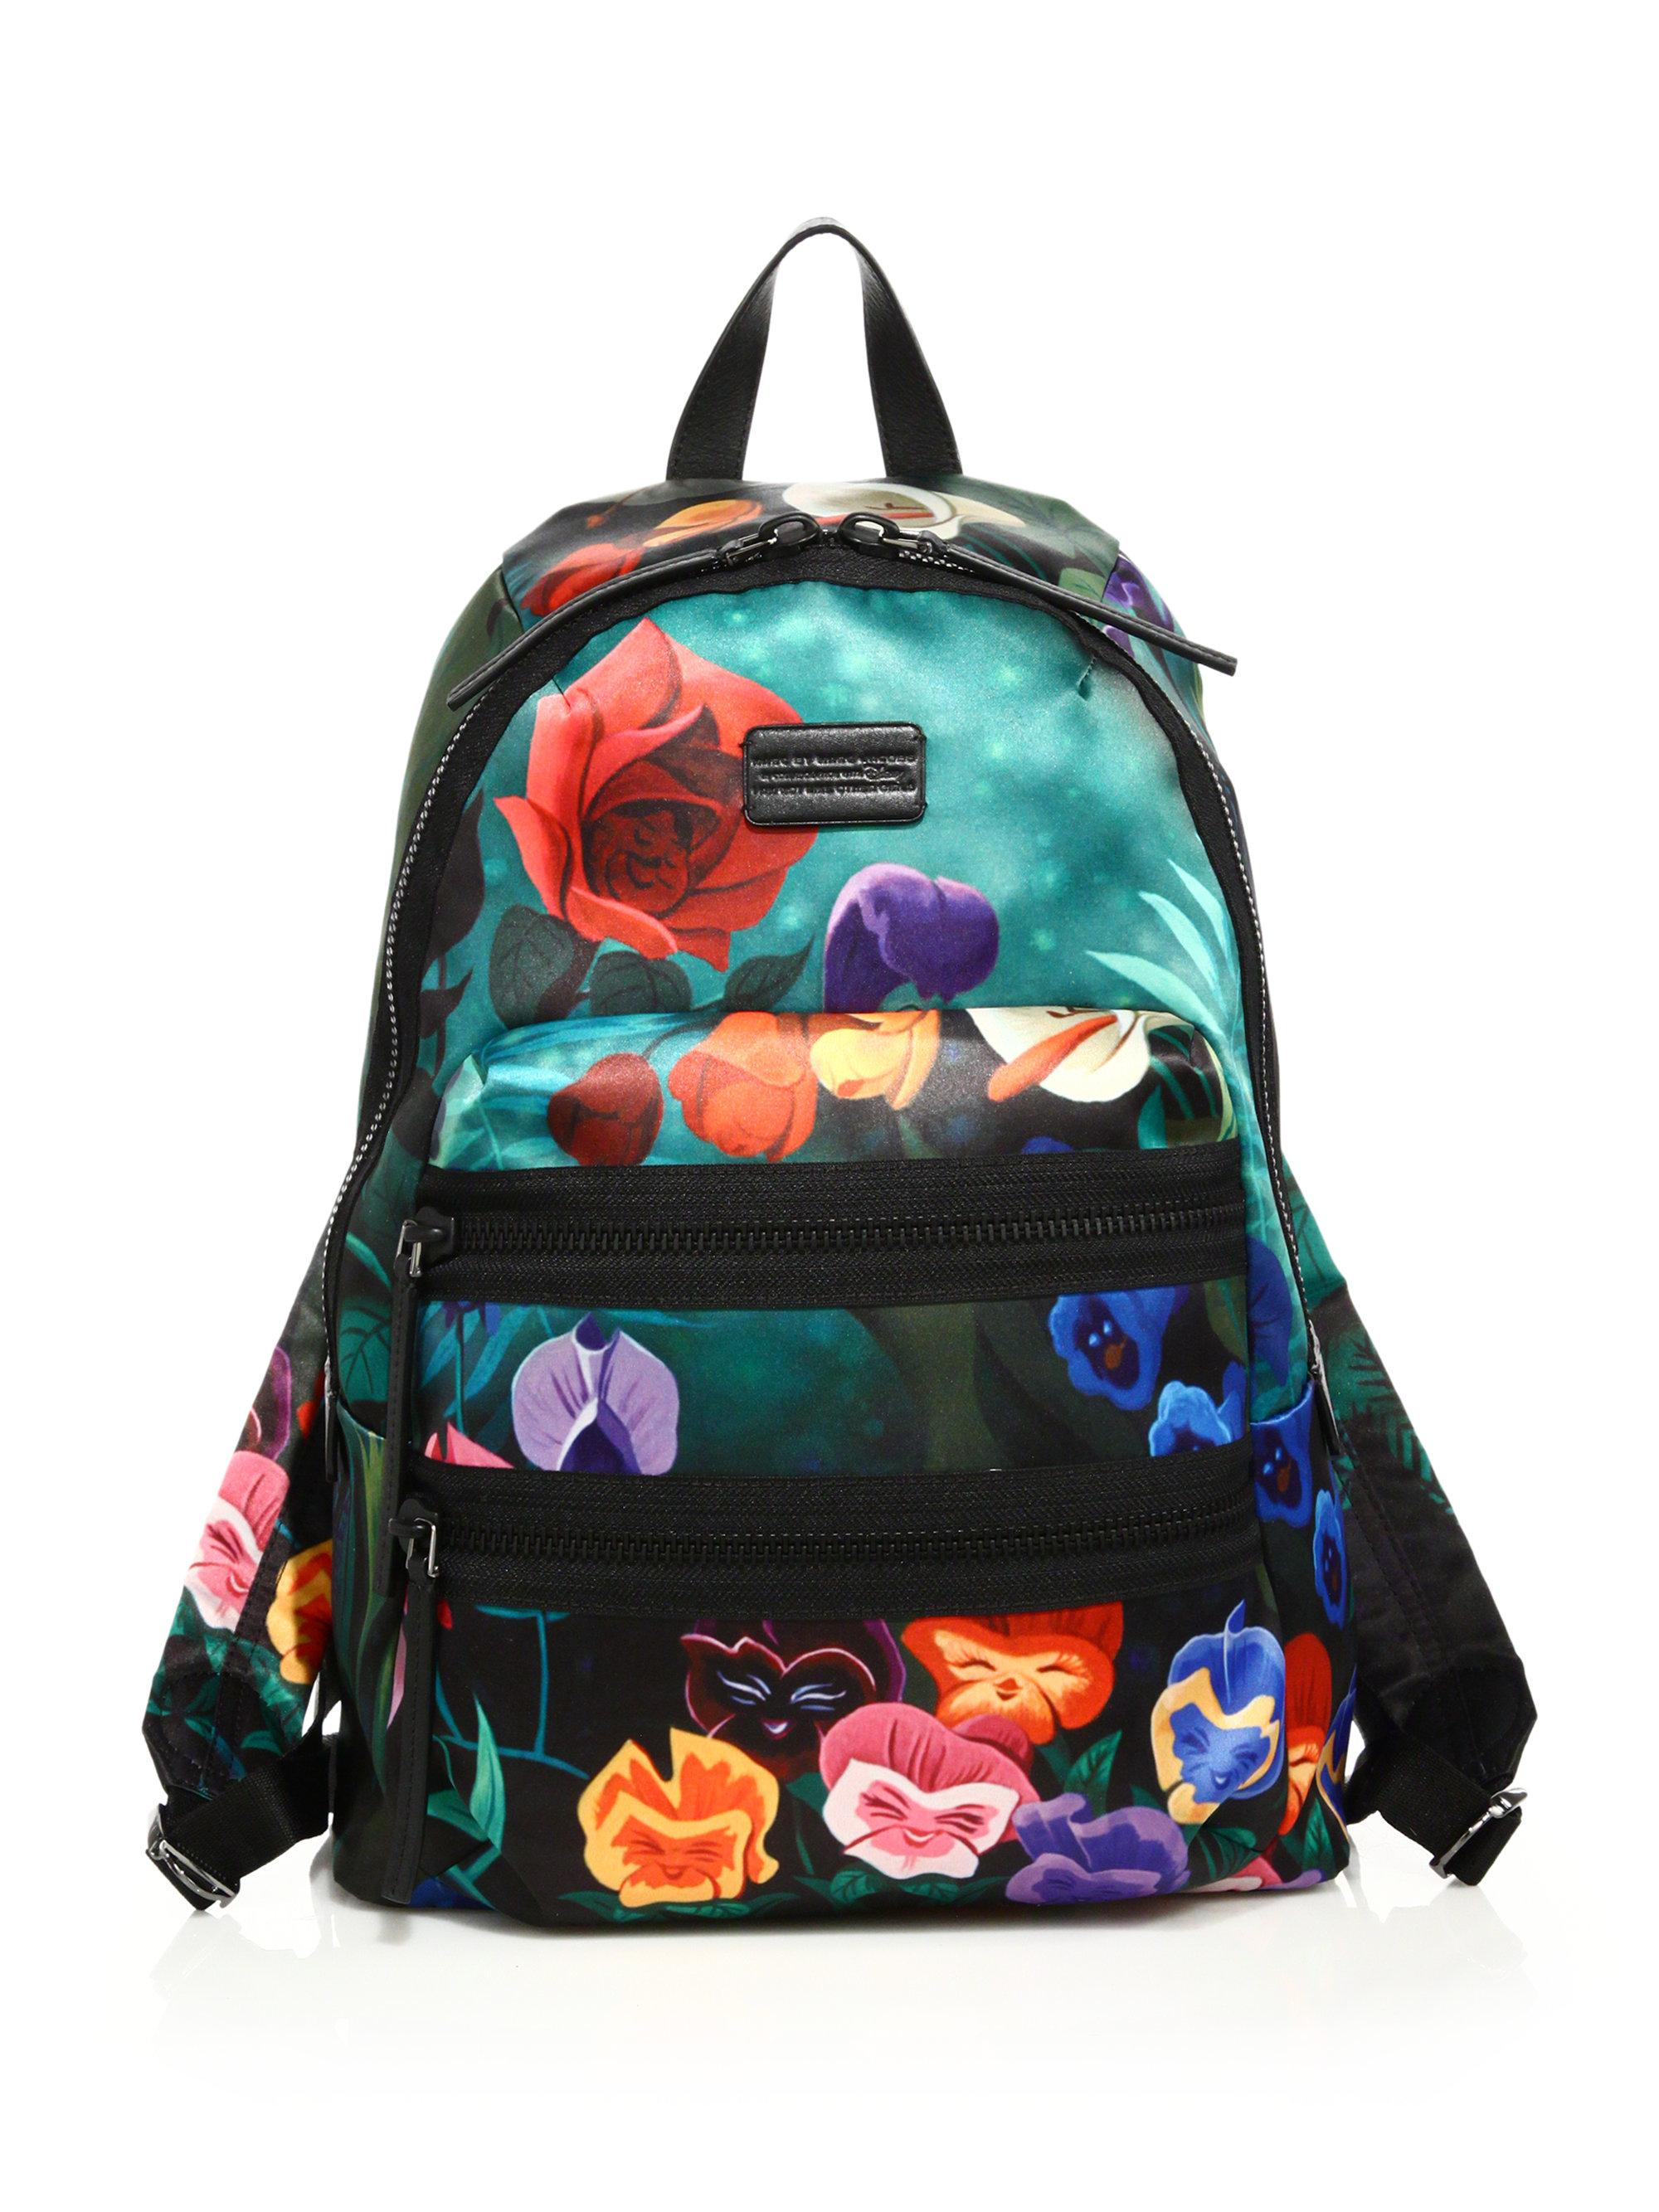 Marc By Marc Jacobs Domo Arigato Packrat Alice In Wonderland Textile Backpack Lyst